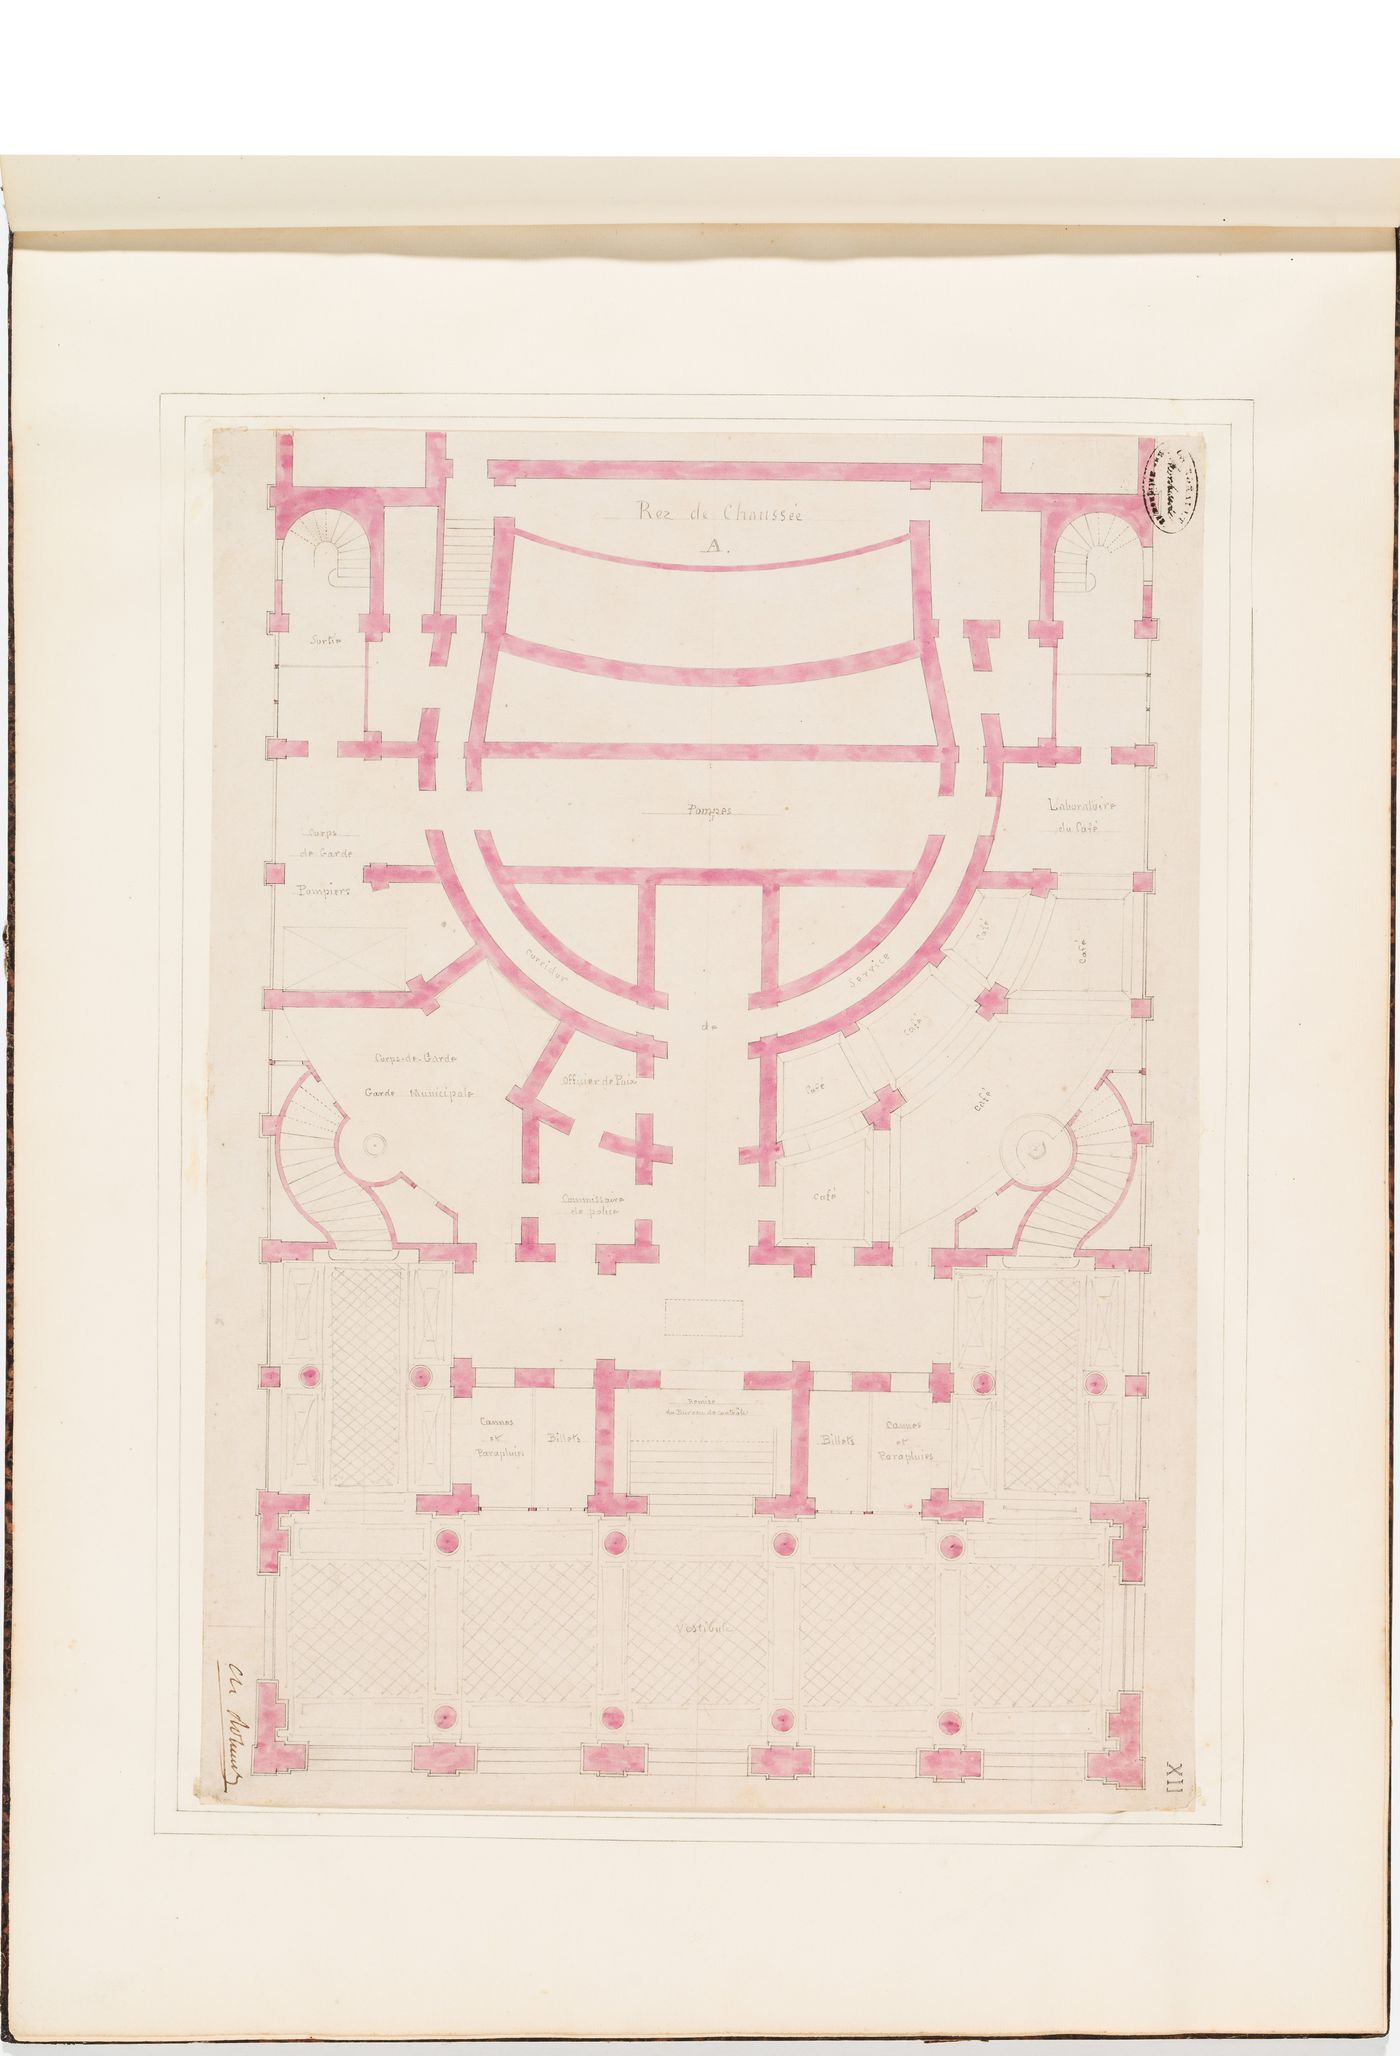 Partial ground floor plan for level A for the Théâtre Royal Italien